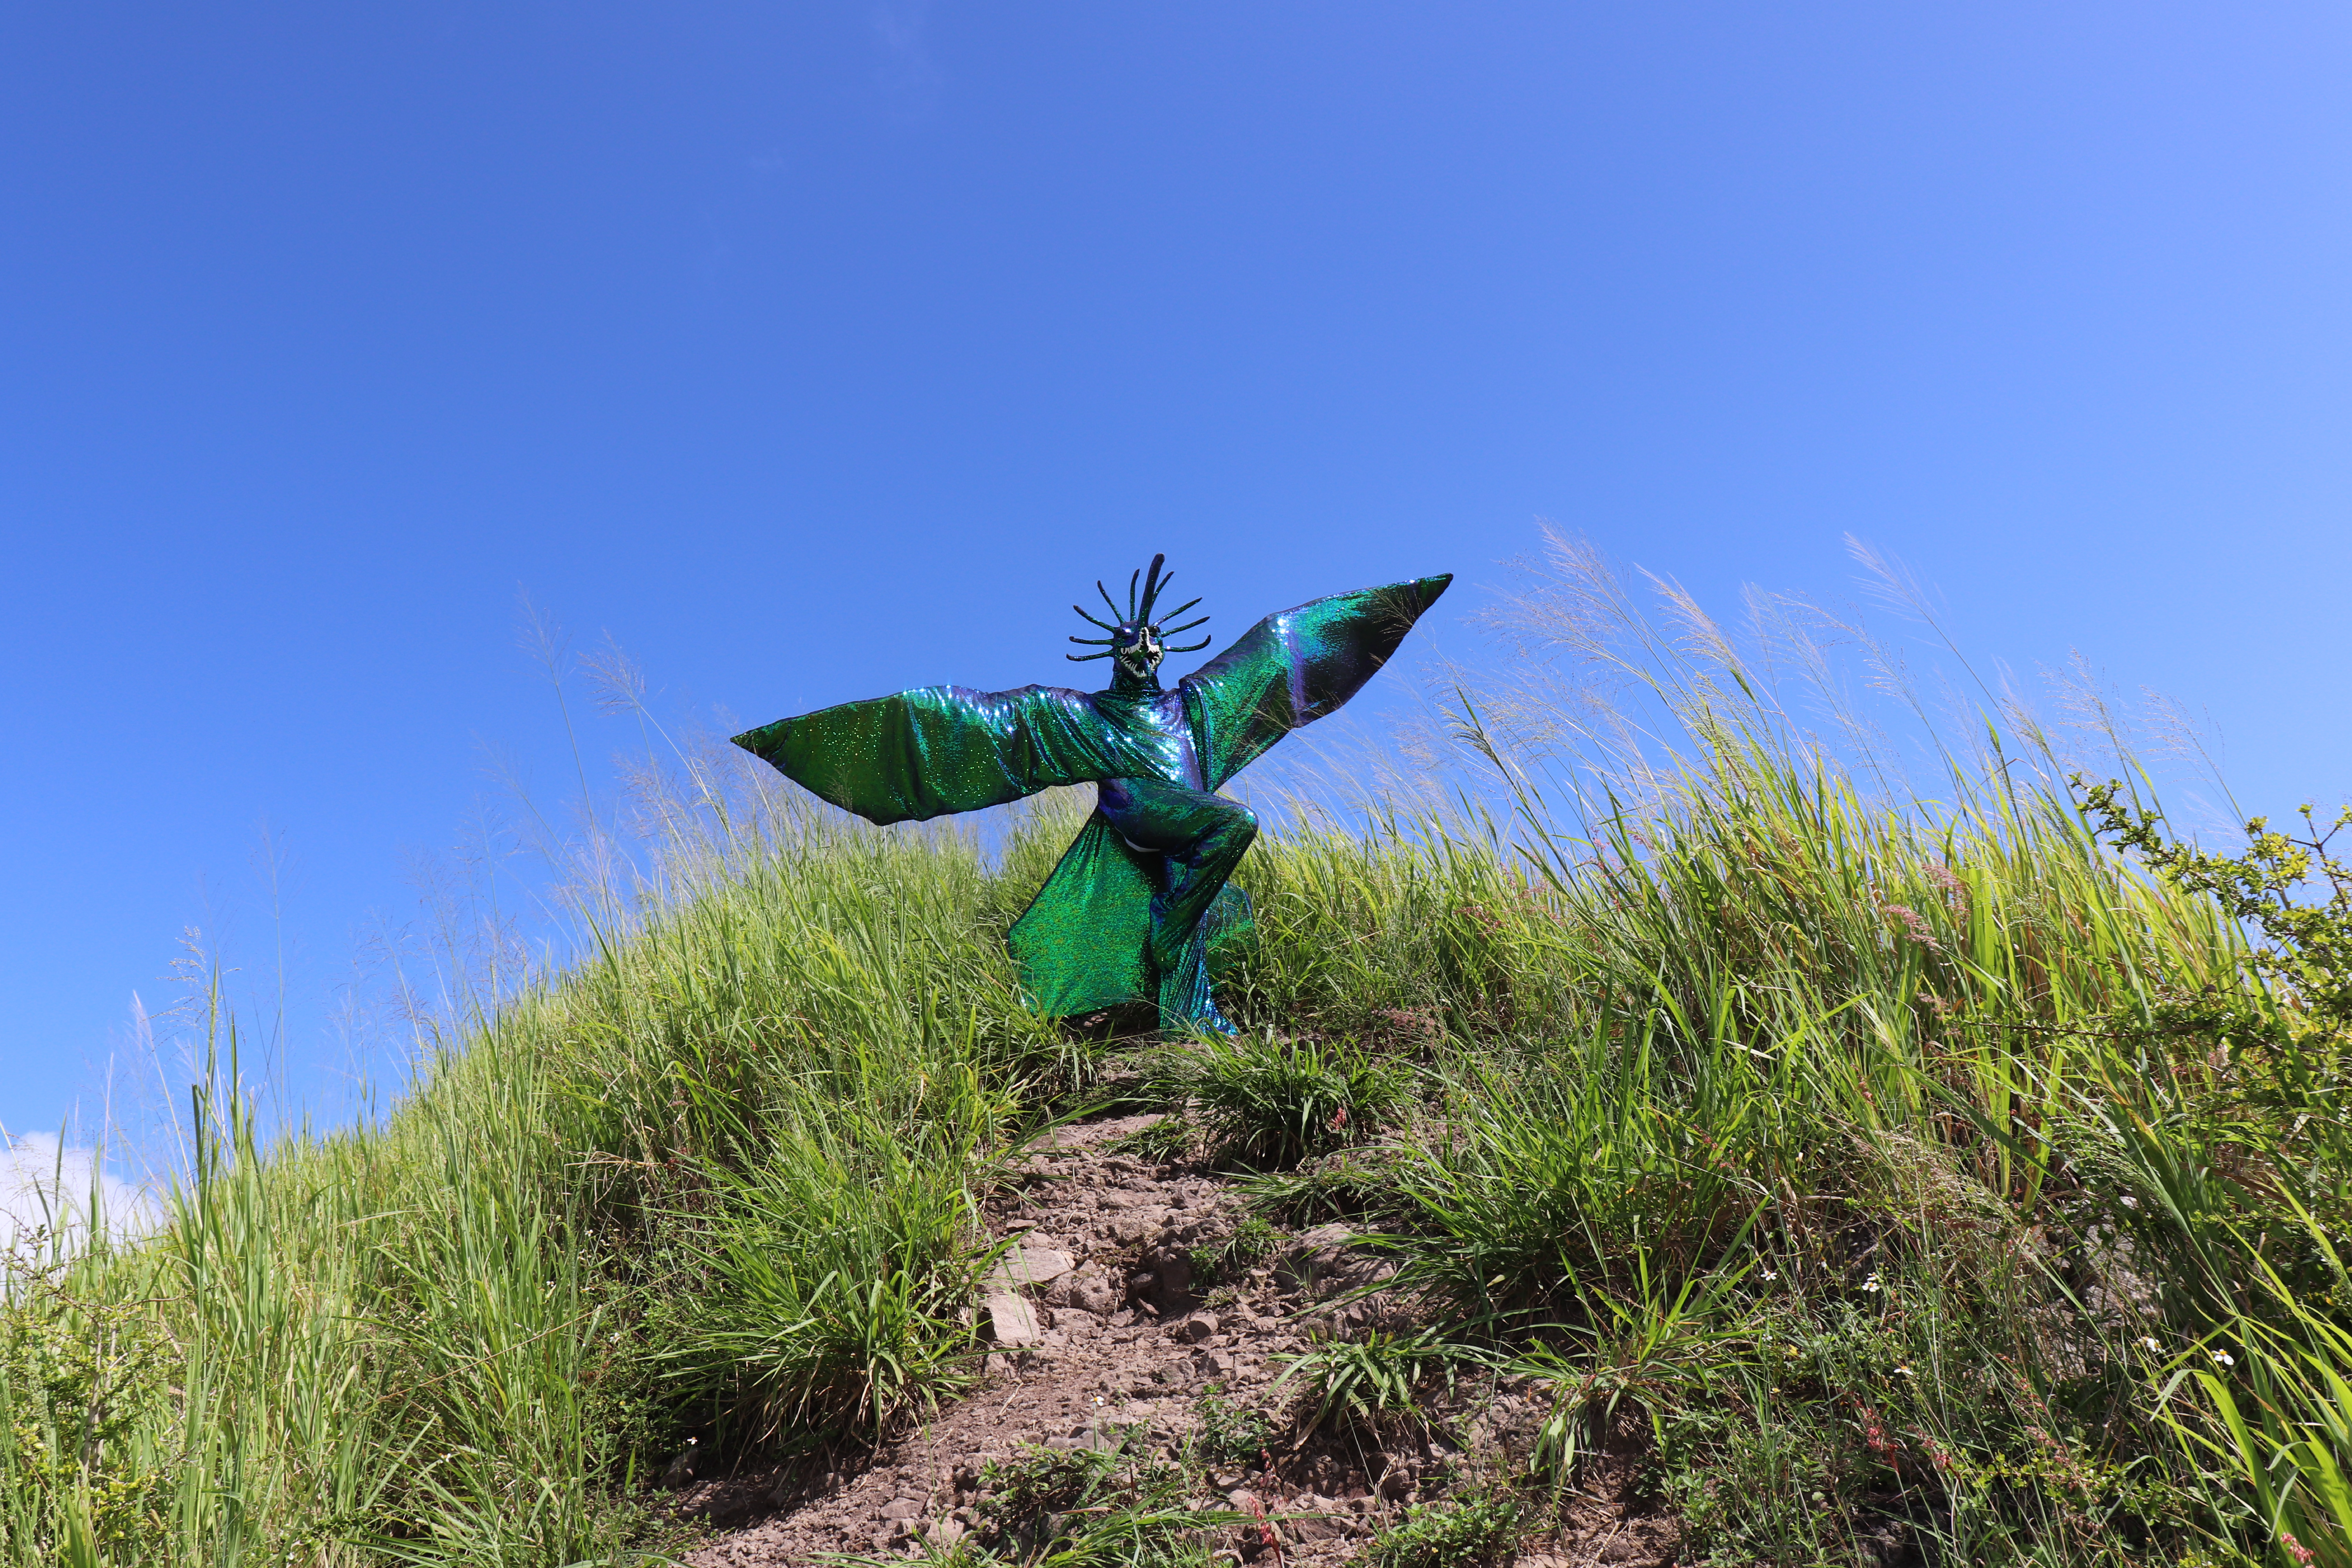 person stands clothed in a sequined costume on top of a grassy cliff